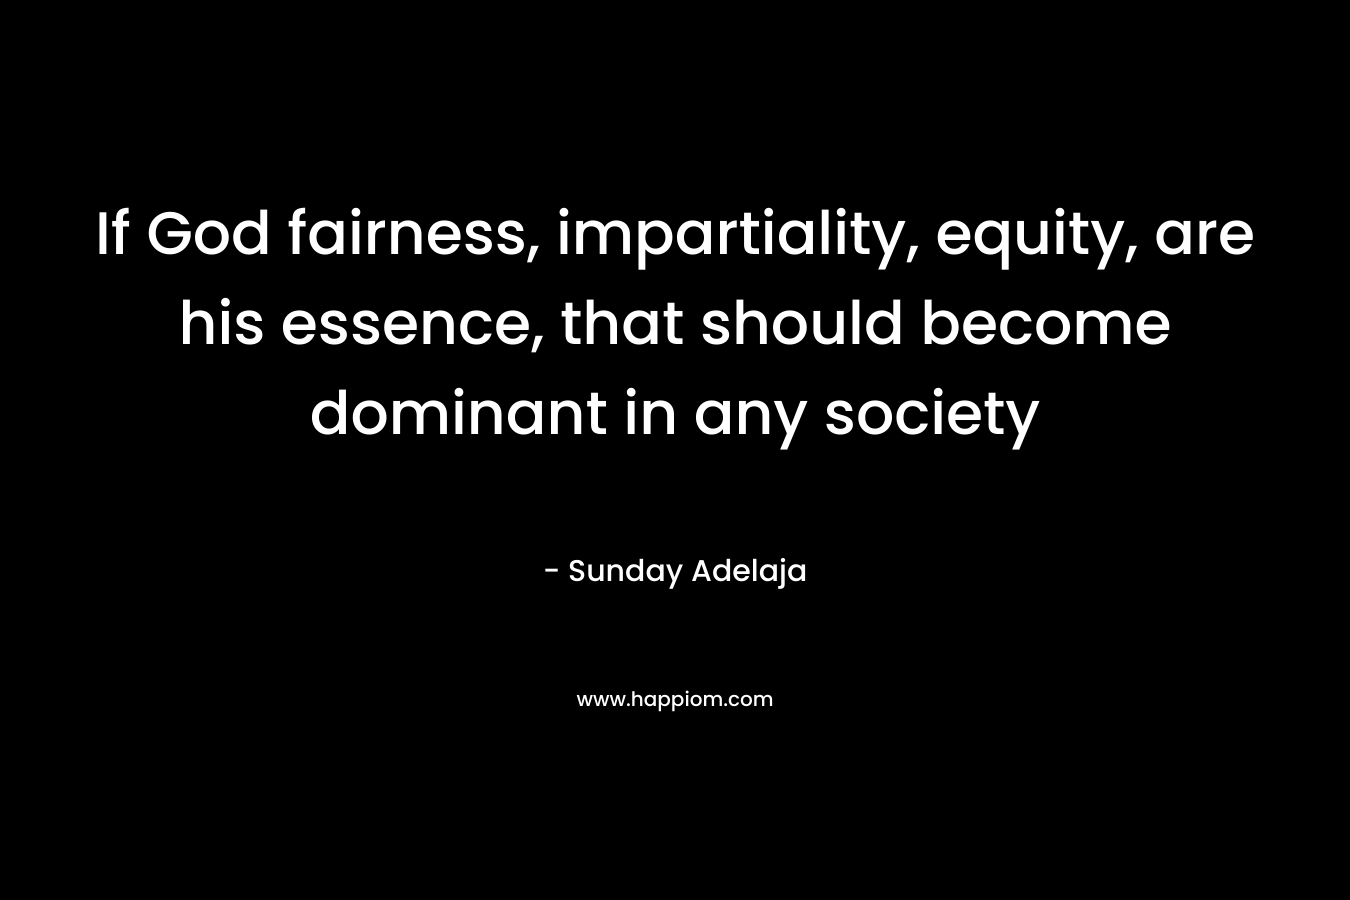 If God fairness, impartiality, equity, are his essence, that should become dominant in any society